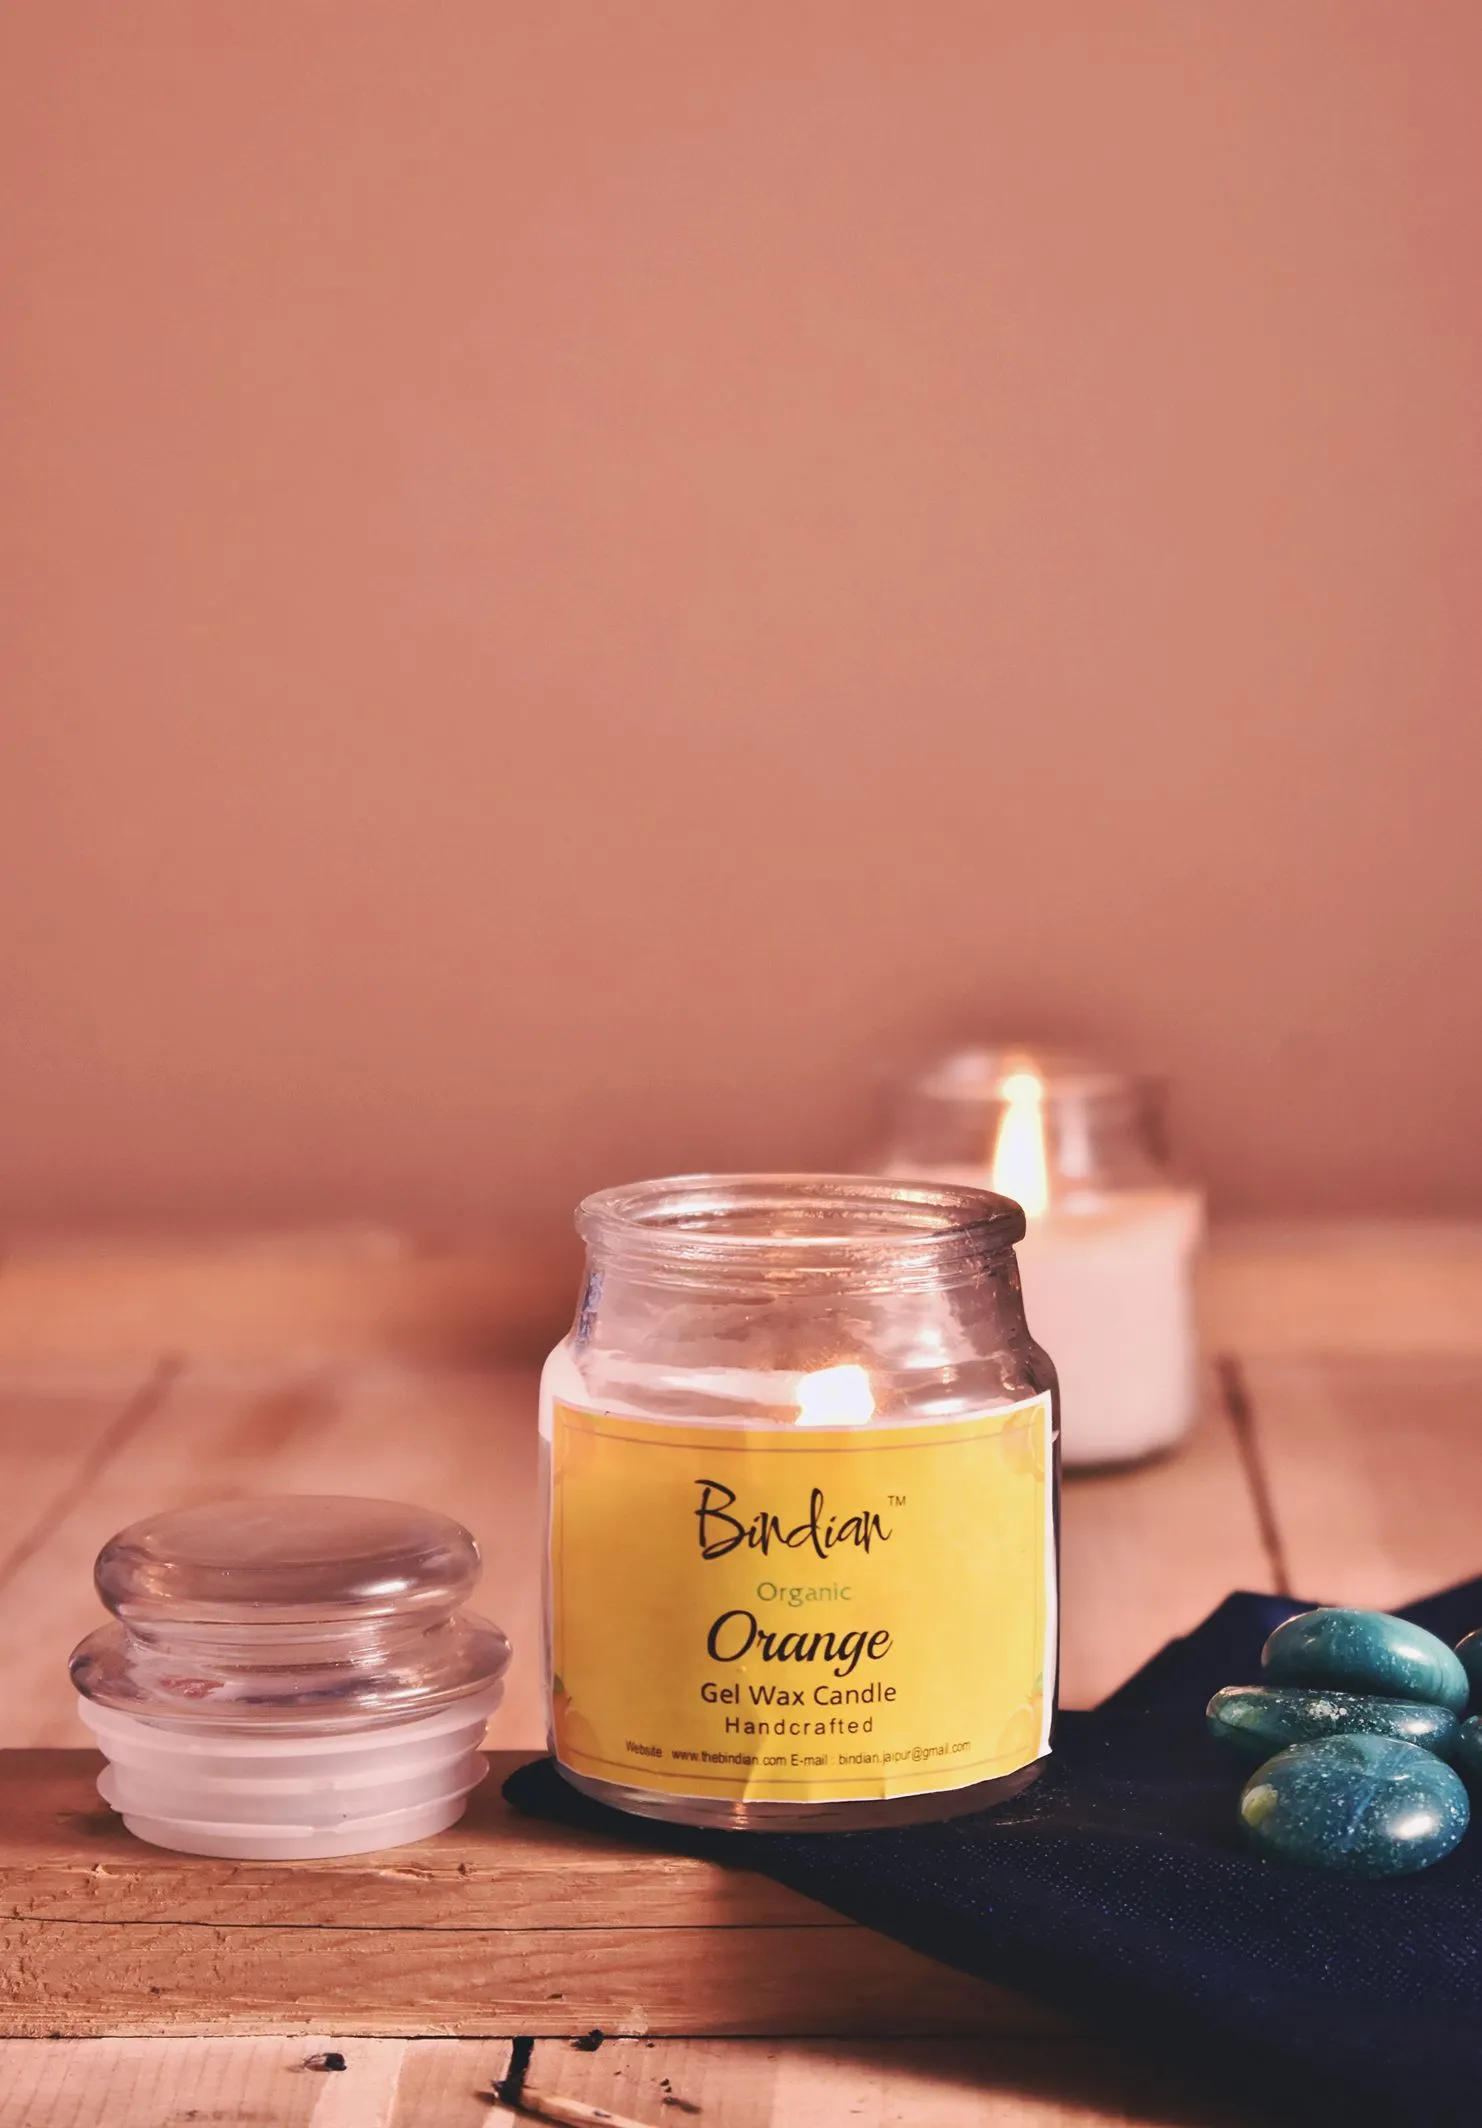 Orange Flavour Scented Candle, 14-18 Hours Long Burning Time